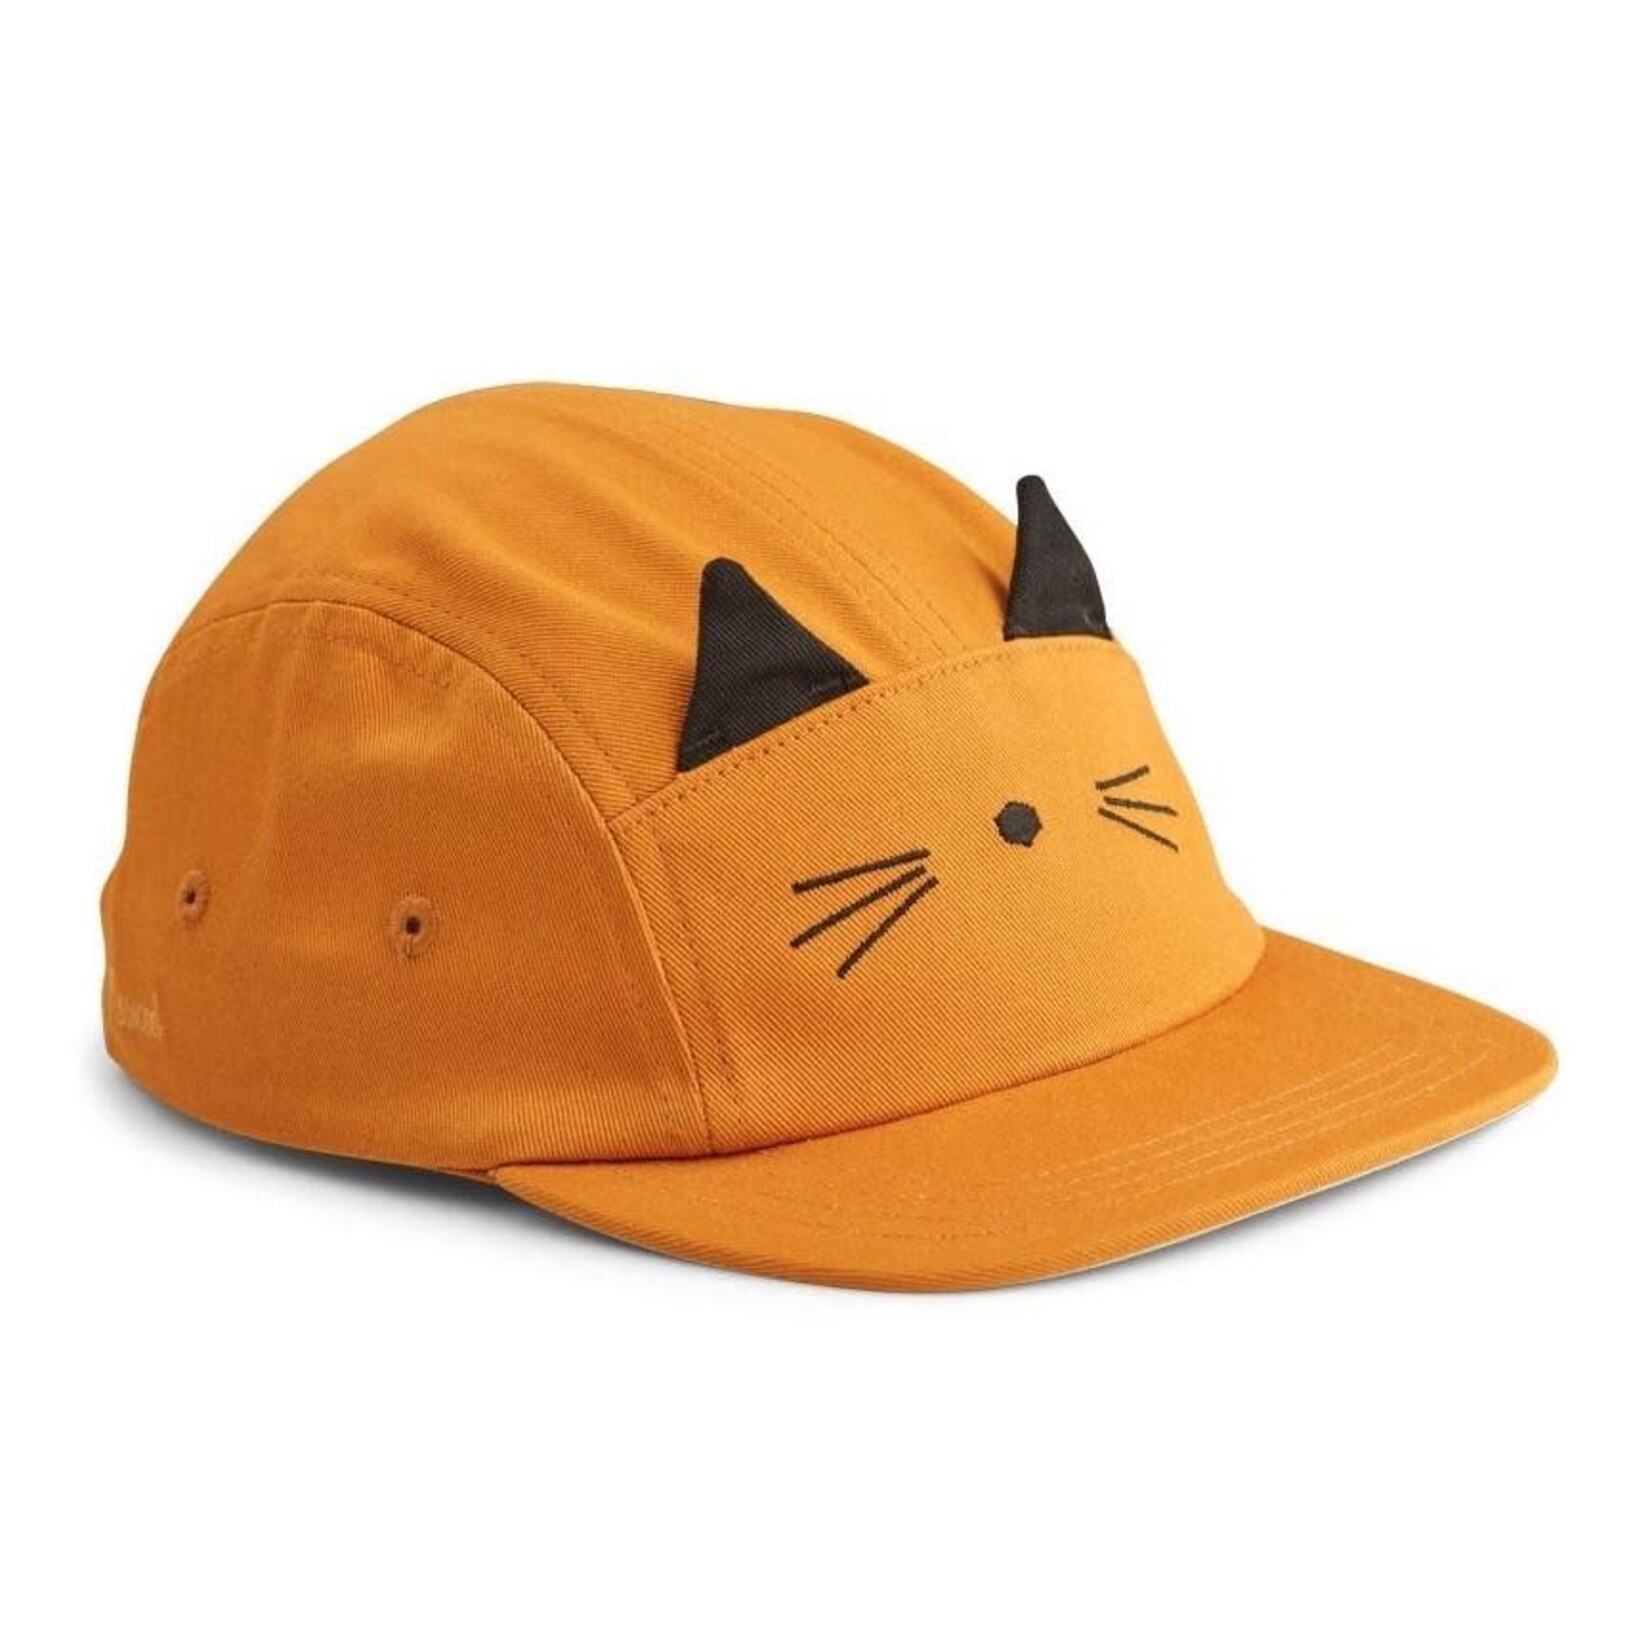 Liewood Rory casquette enfant cat mustard